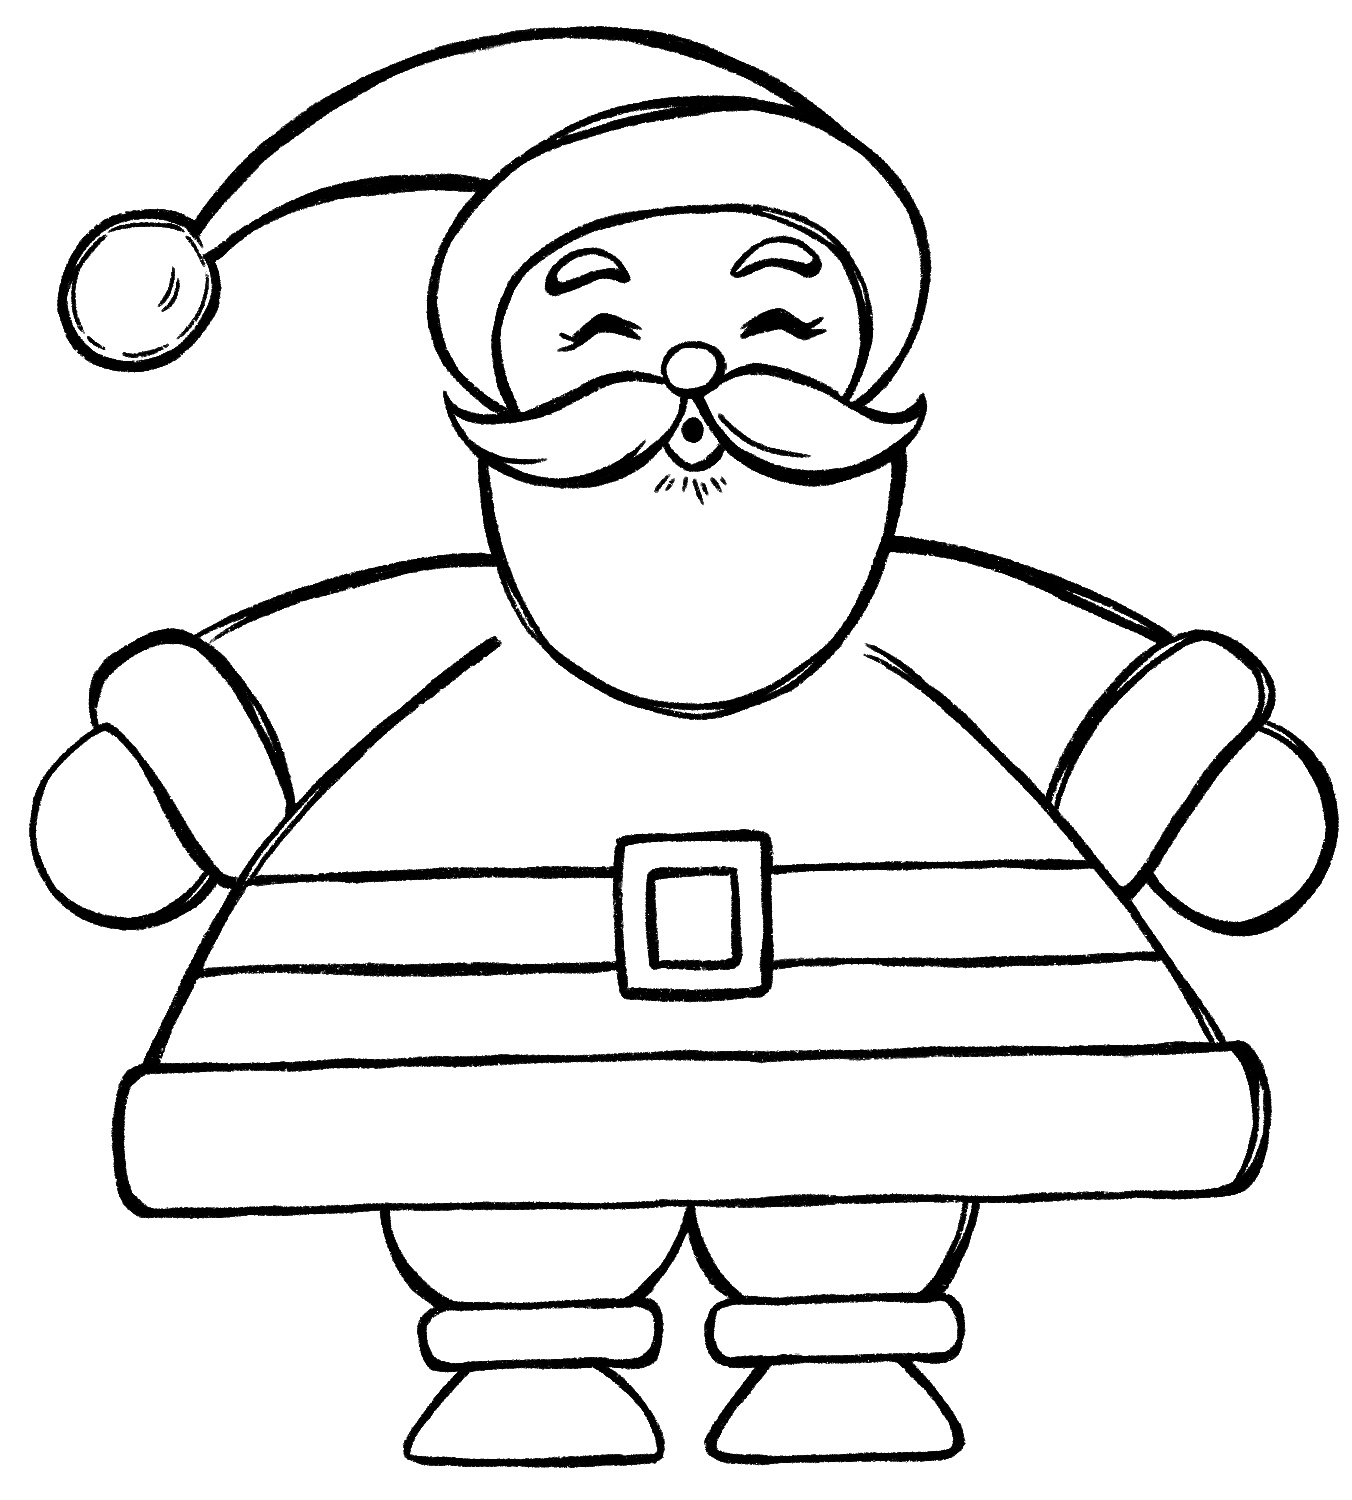 How to Draw Santa Claus - Easy Drawing Art